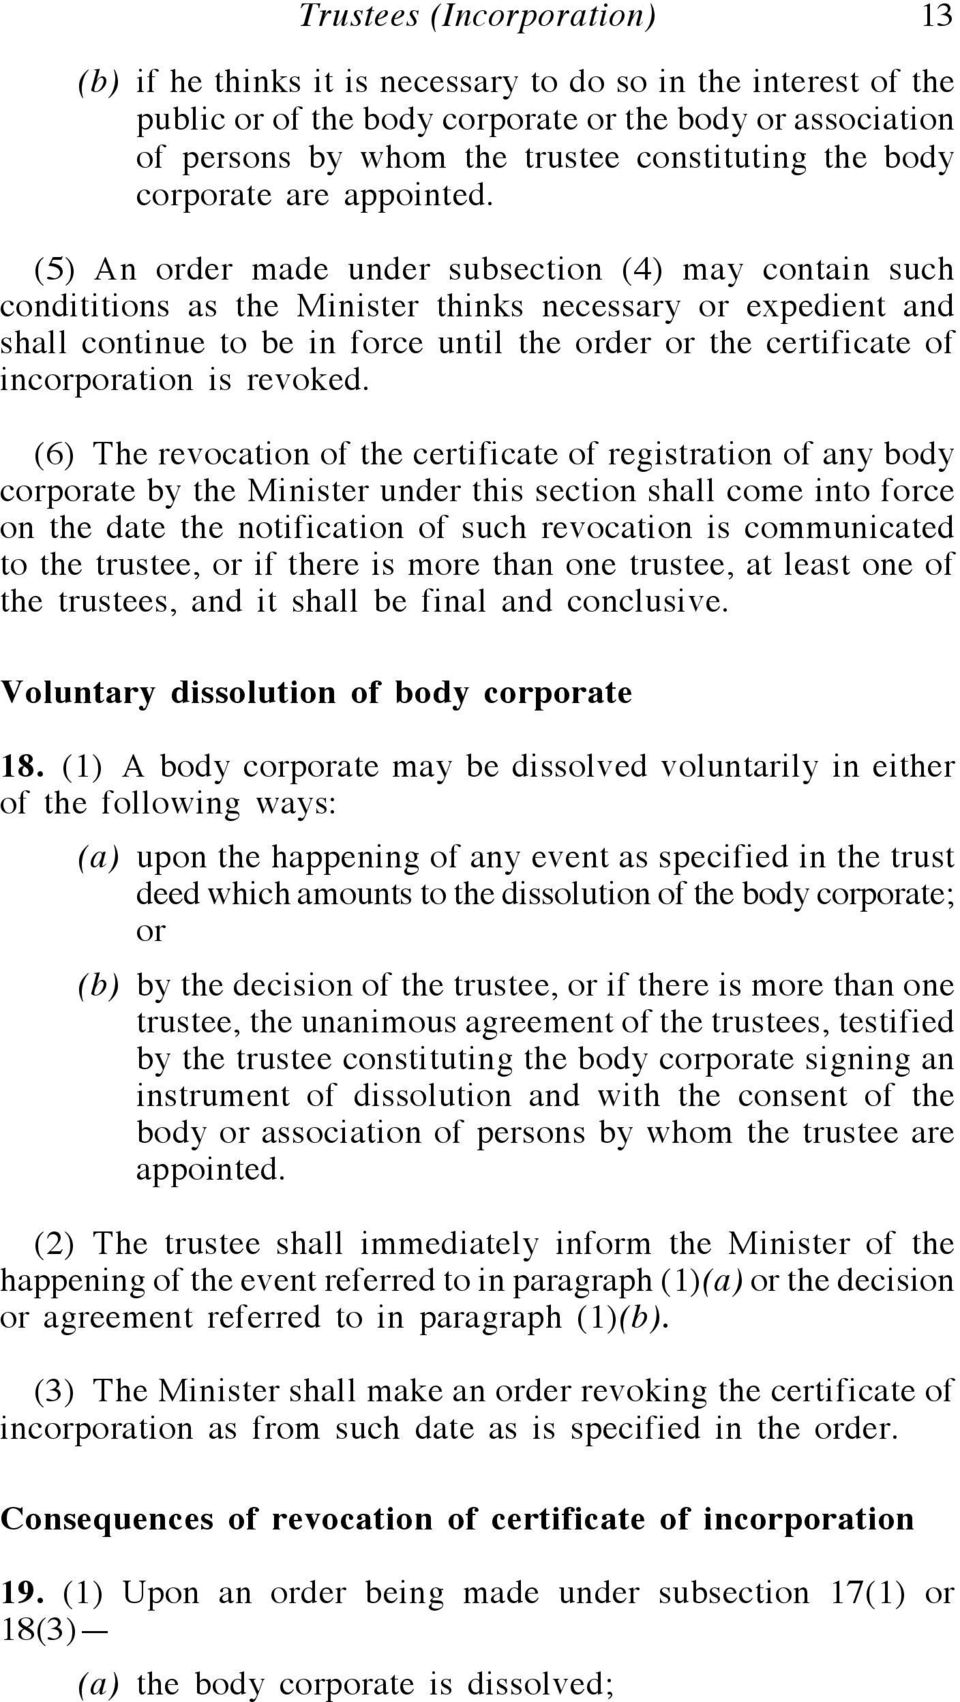 (5) An order made under subsection (4) may contain such condititions as the Minister thinks necessary or expedient and shall continue to be in force until the order or the certificate of